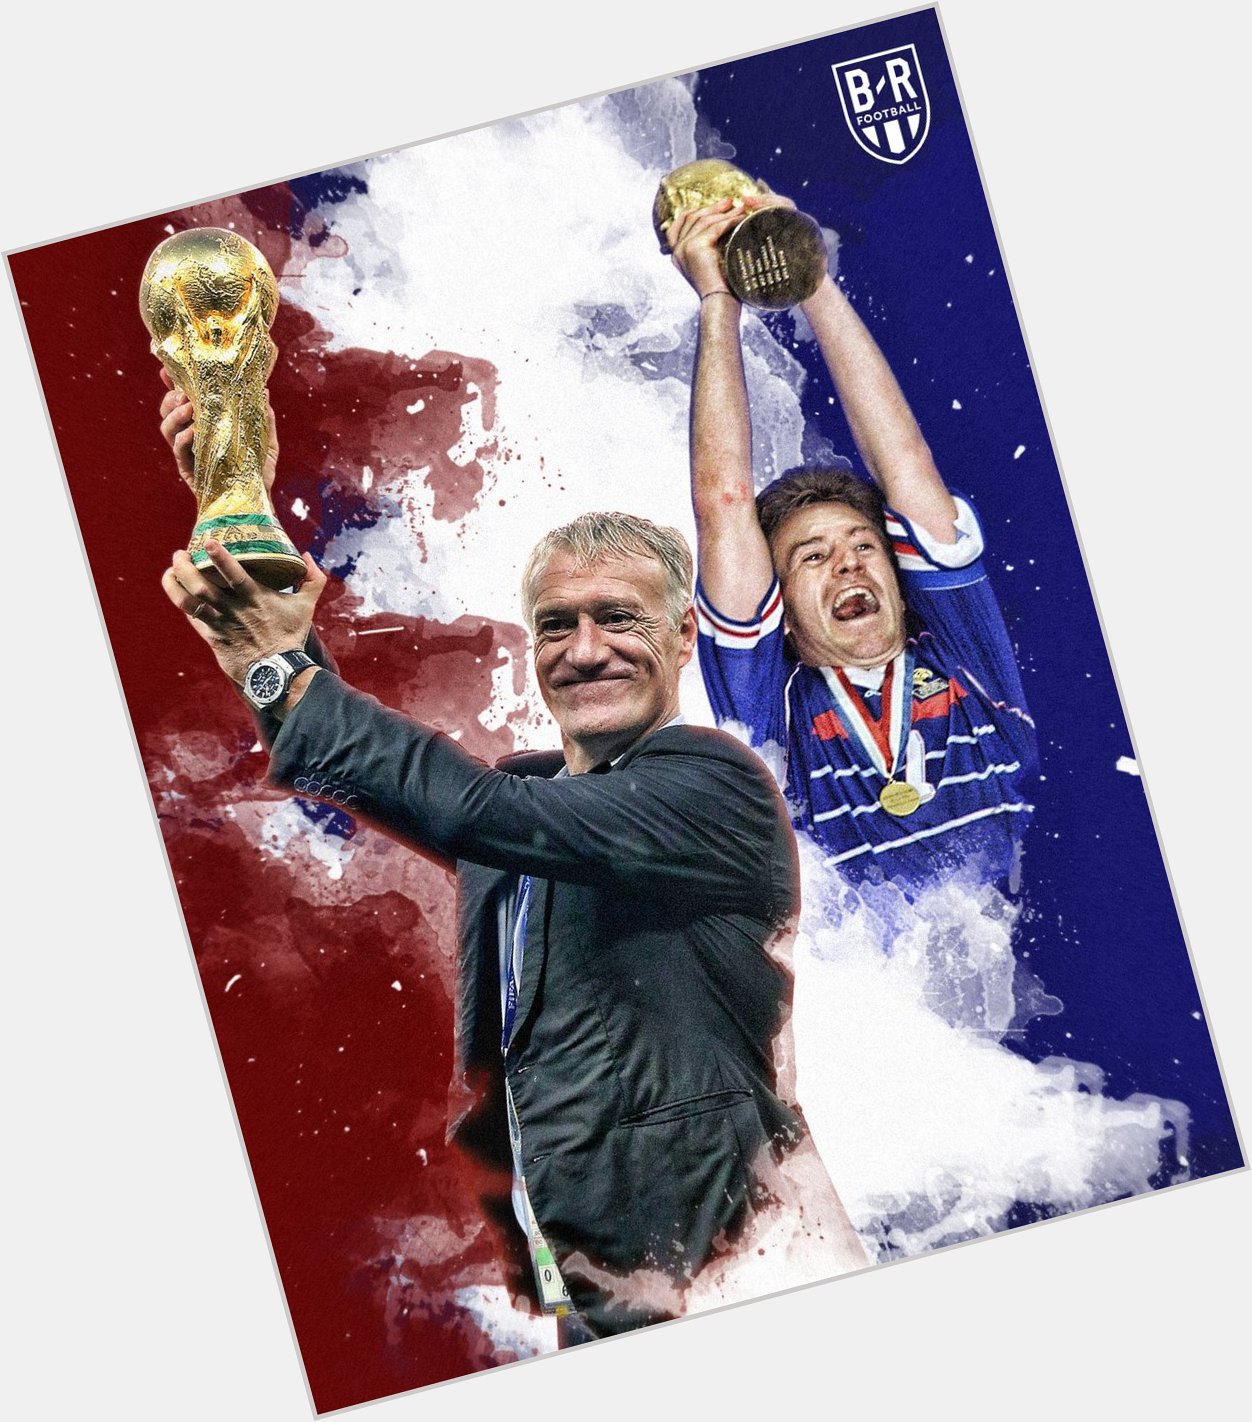 Happy birthday to Didier Deschamps, World Cup winner as a manager and player before the age of 50 